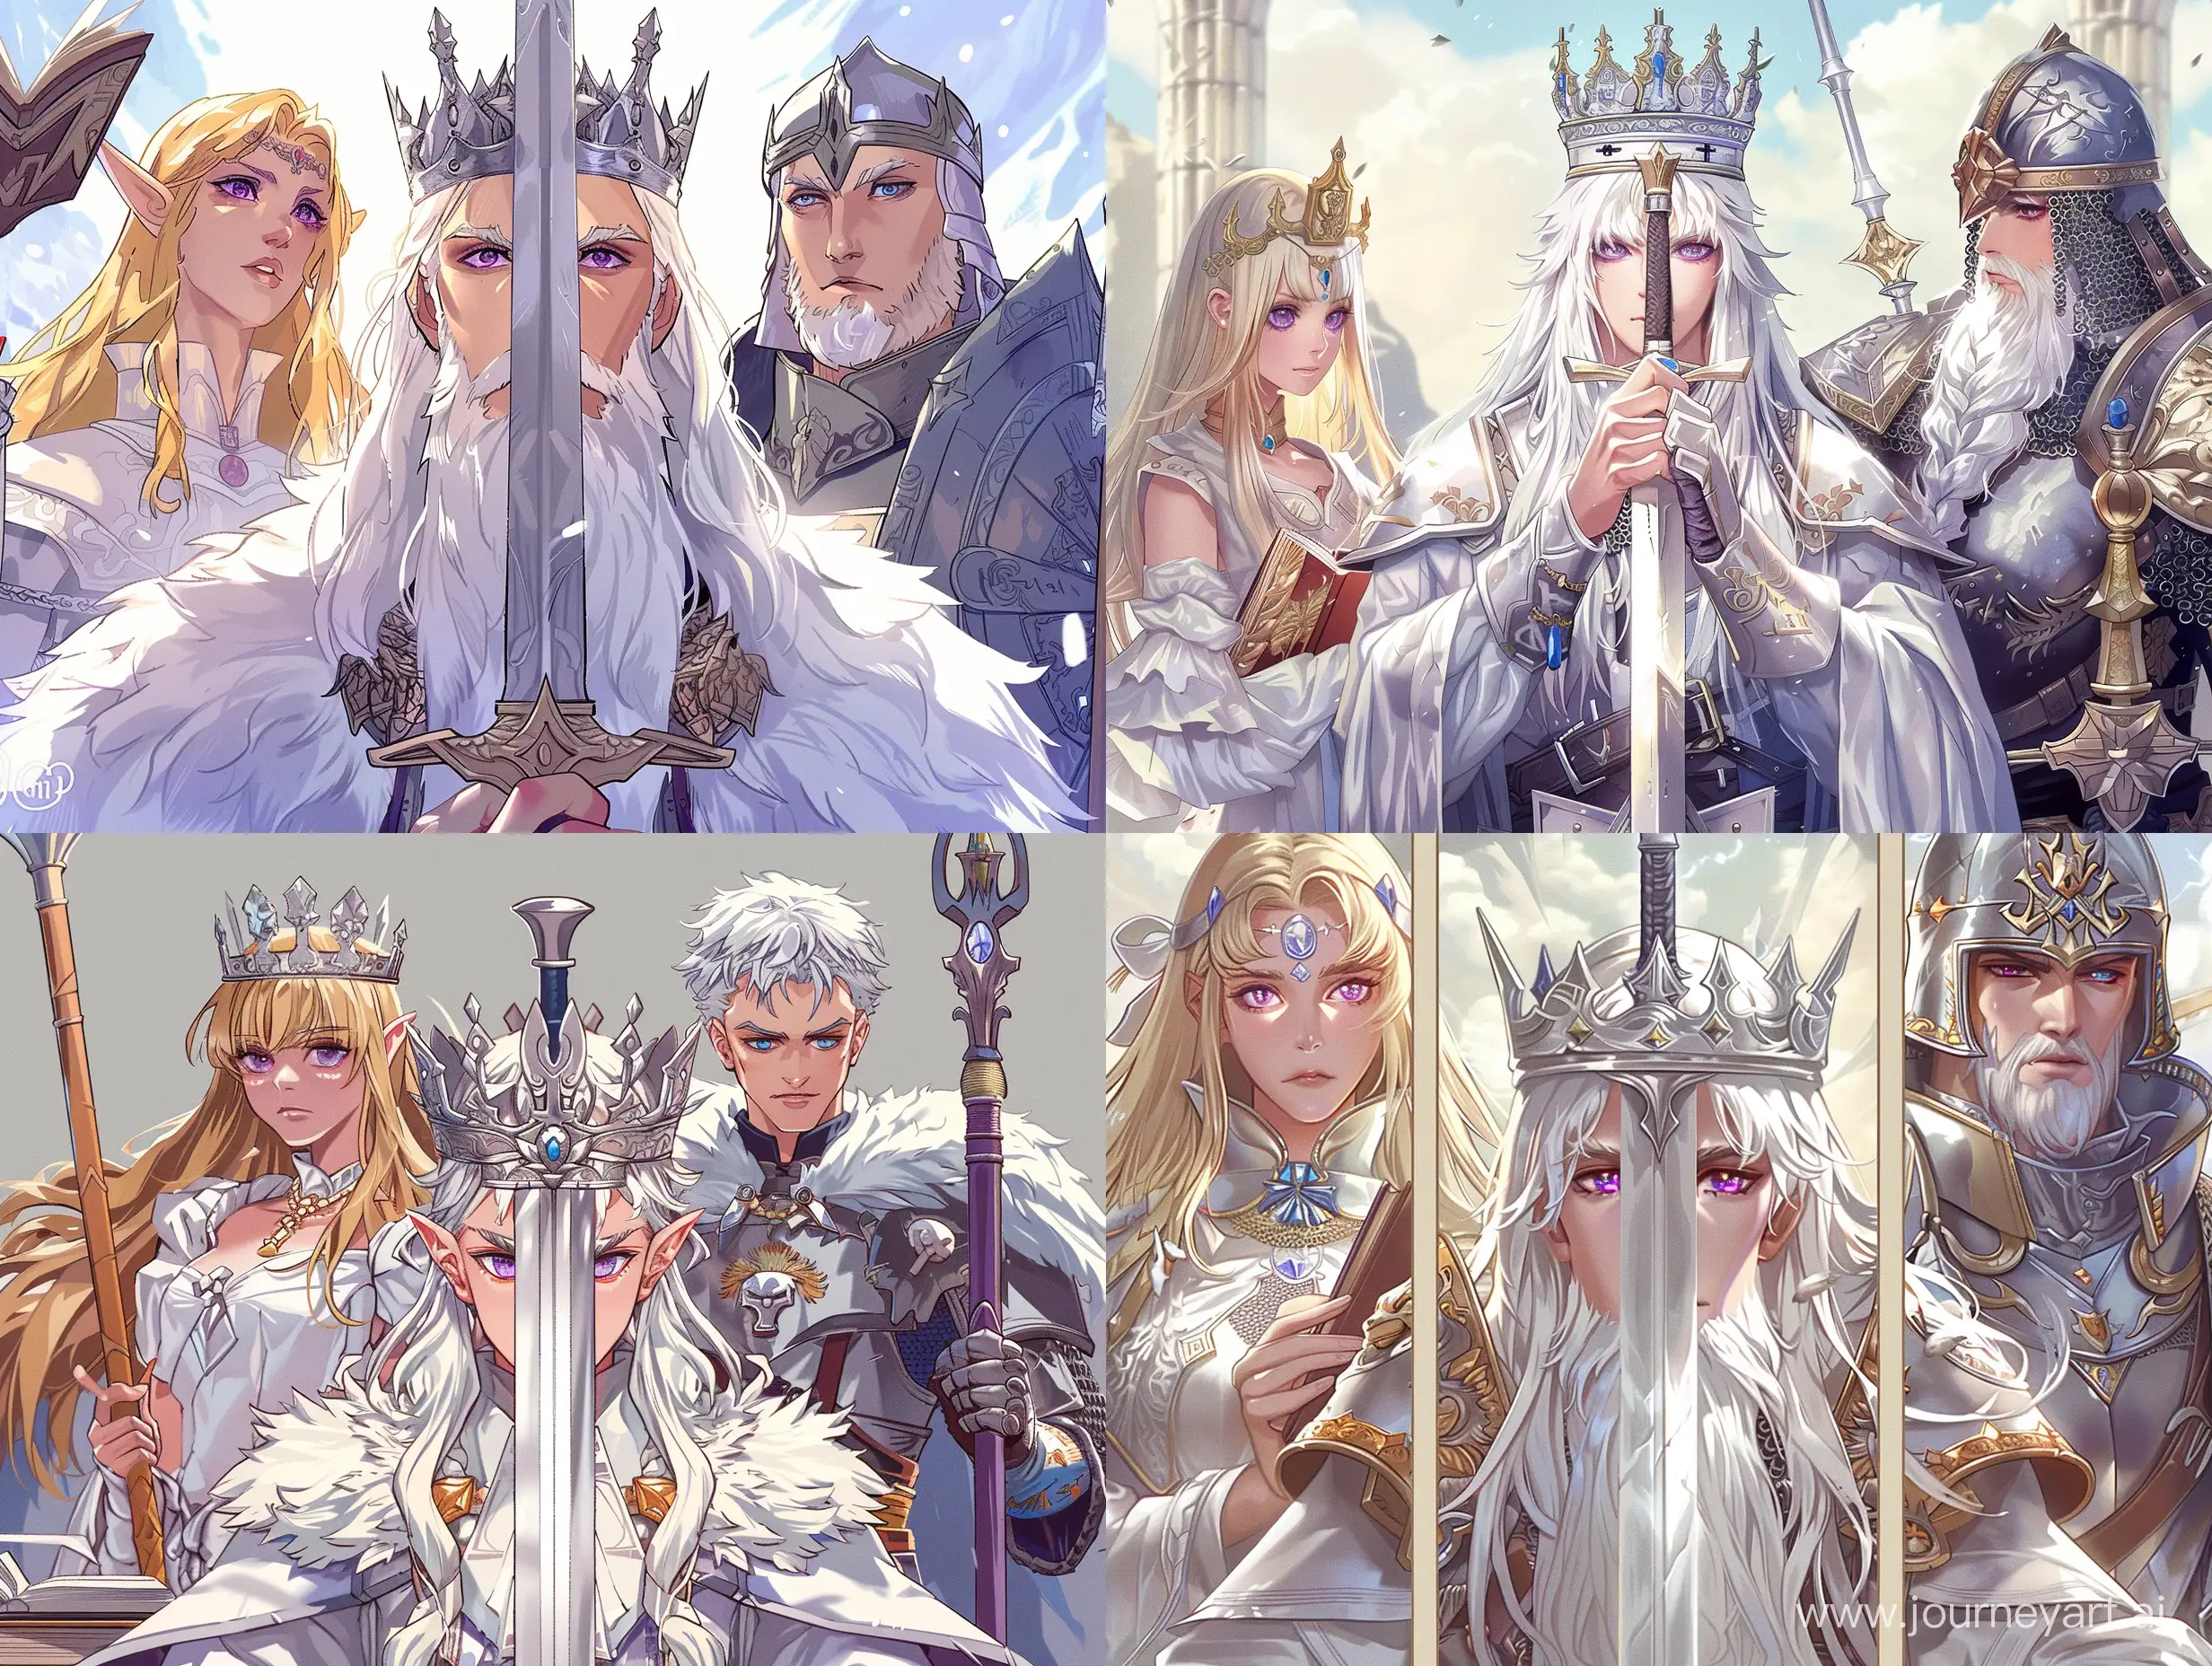 Medieval-Fantasy-Characters-SilverCrowned-Man-GoldenHaired-Girl-and-Armored-Warrior-in-Crusader-Kings-3-Style